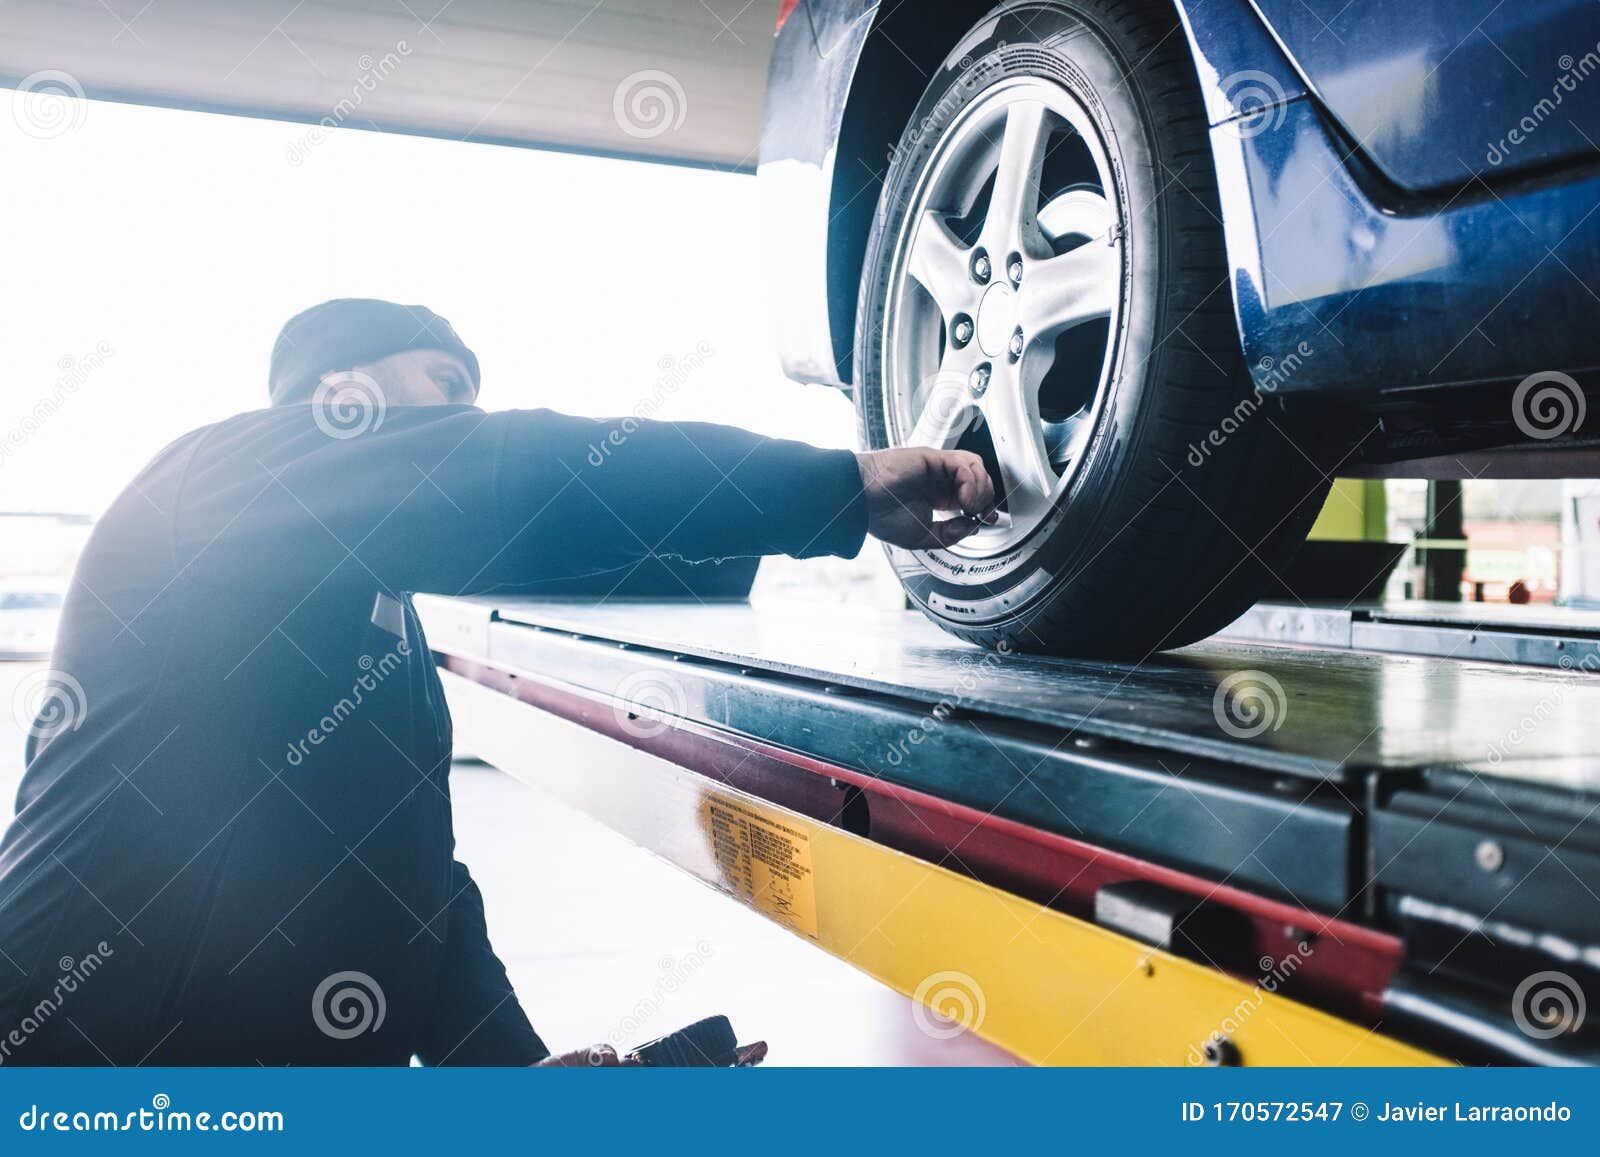 caucasian mechanic checking the wheels presion during a tune-up